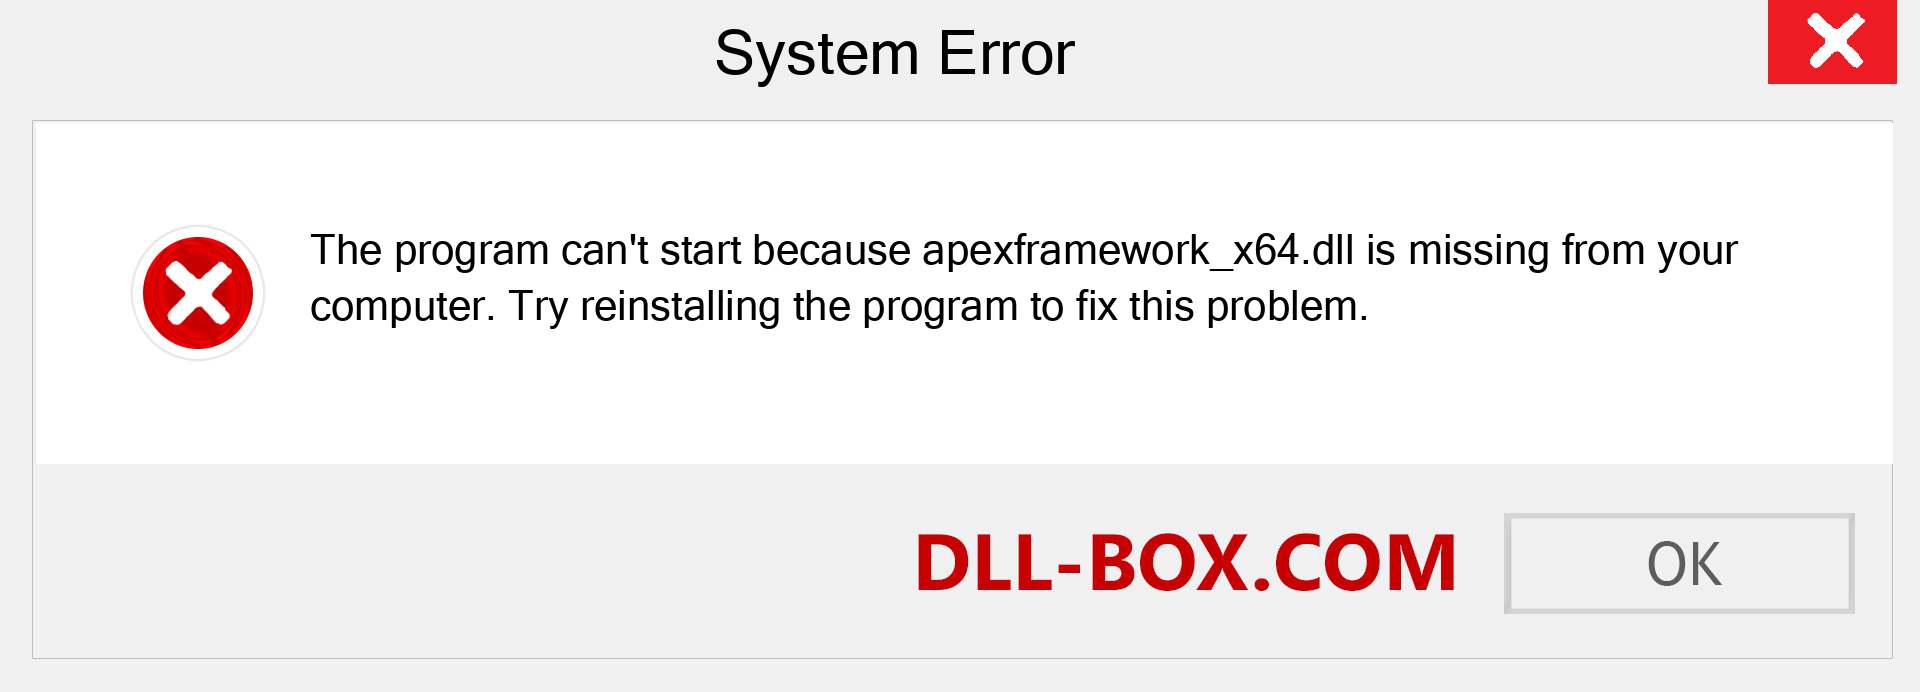  apexframework_x64.dll file is missing?. Download for Windows 7, 8, 10 - Fix  apexframework_x64 dll Missing Error on Windows, photos, images